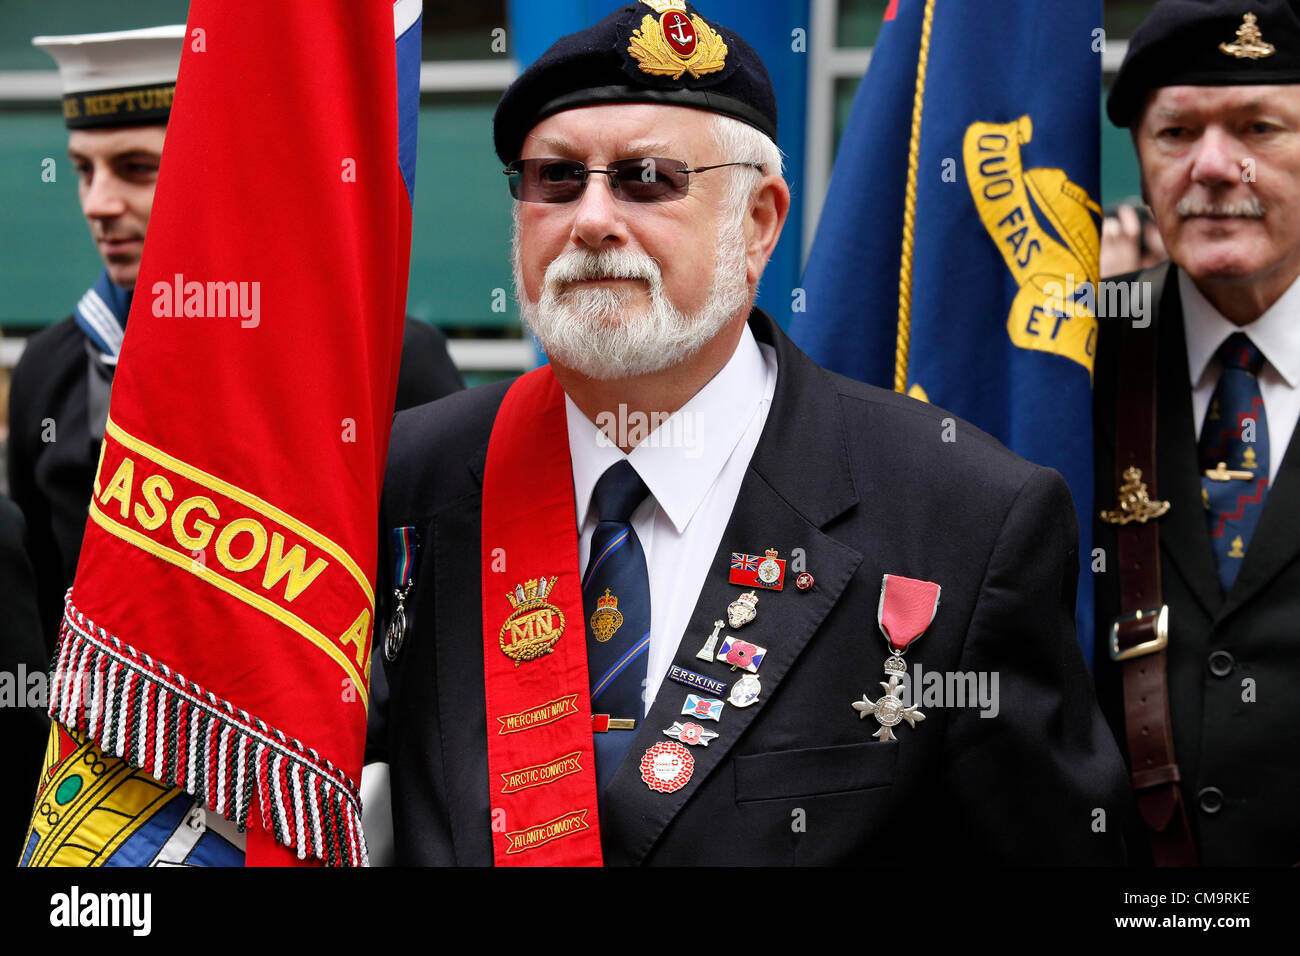 30 June 2012. Armed Forces Day. Glasgow, Scotland, UK, John Mortimer MBE and retired member of the Merchant Navy, on parade with his flag and MBE medal at the start of the military parade from Holland Street, Glasgow. Stock Photo